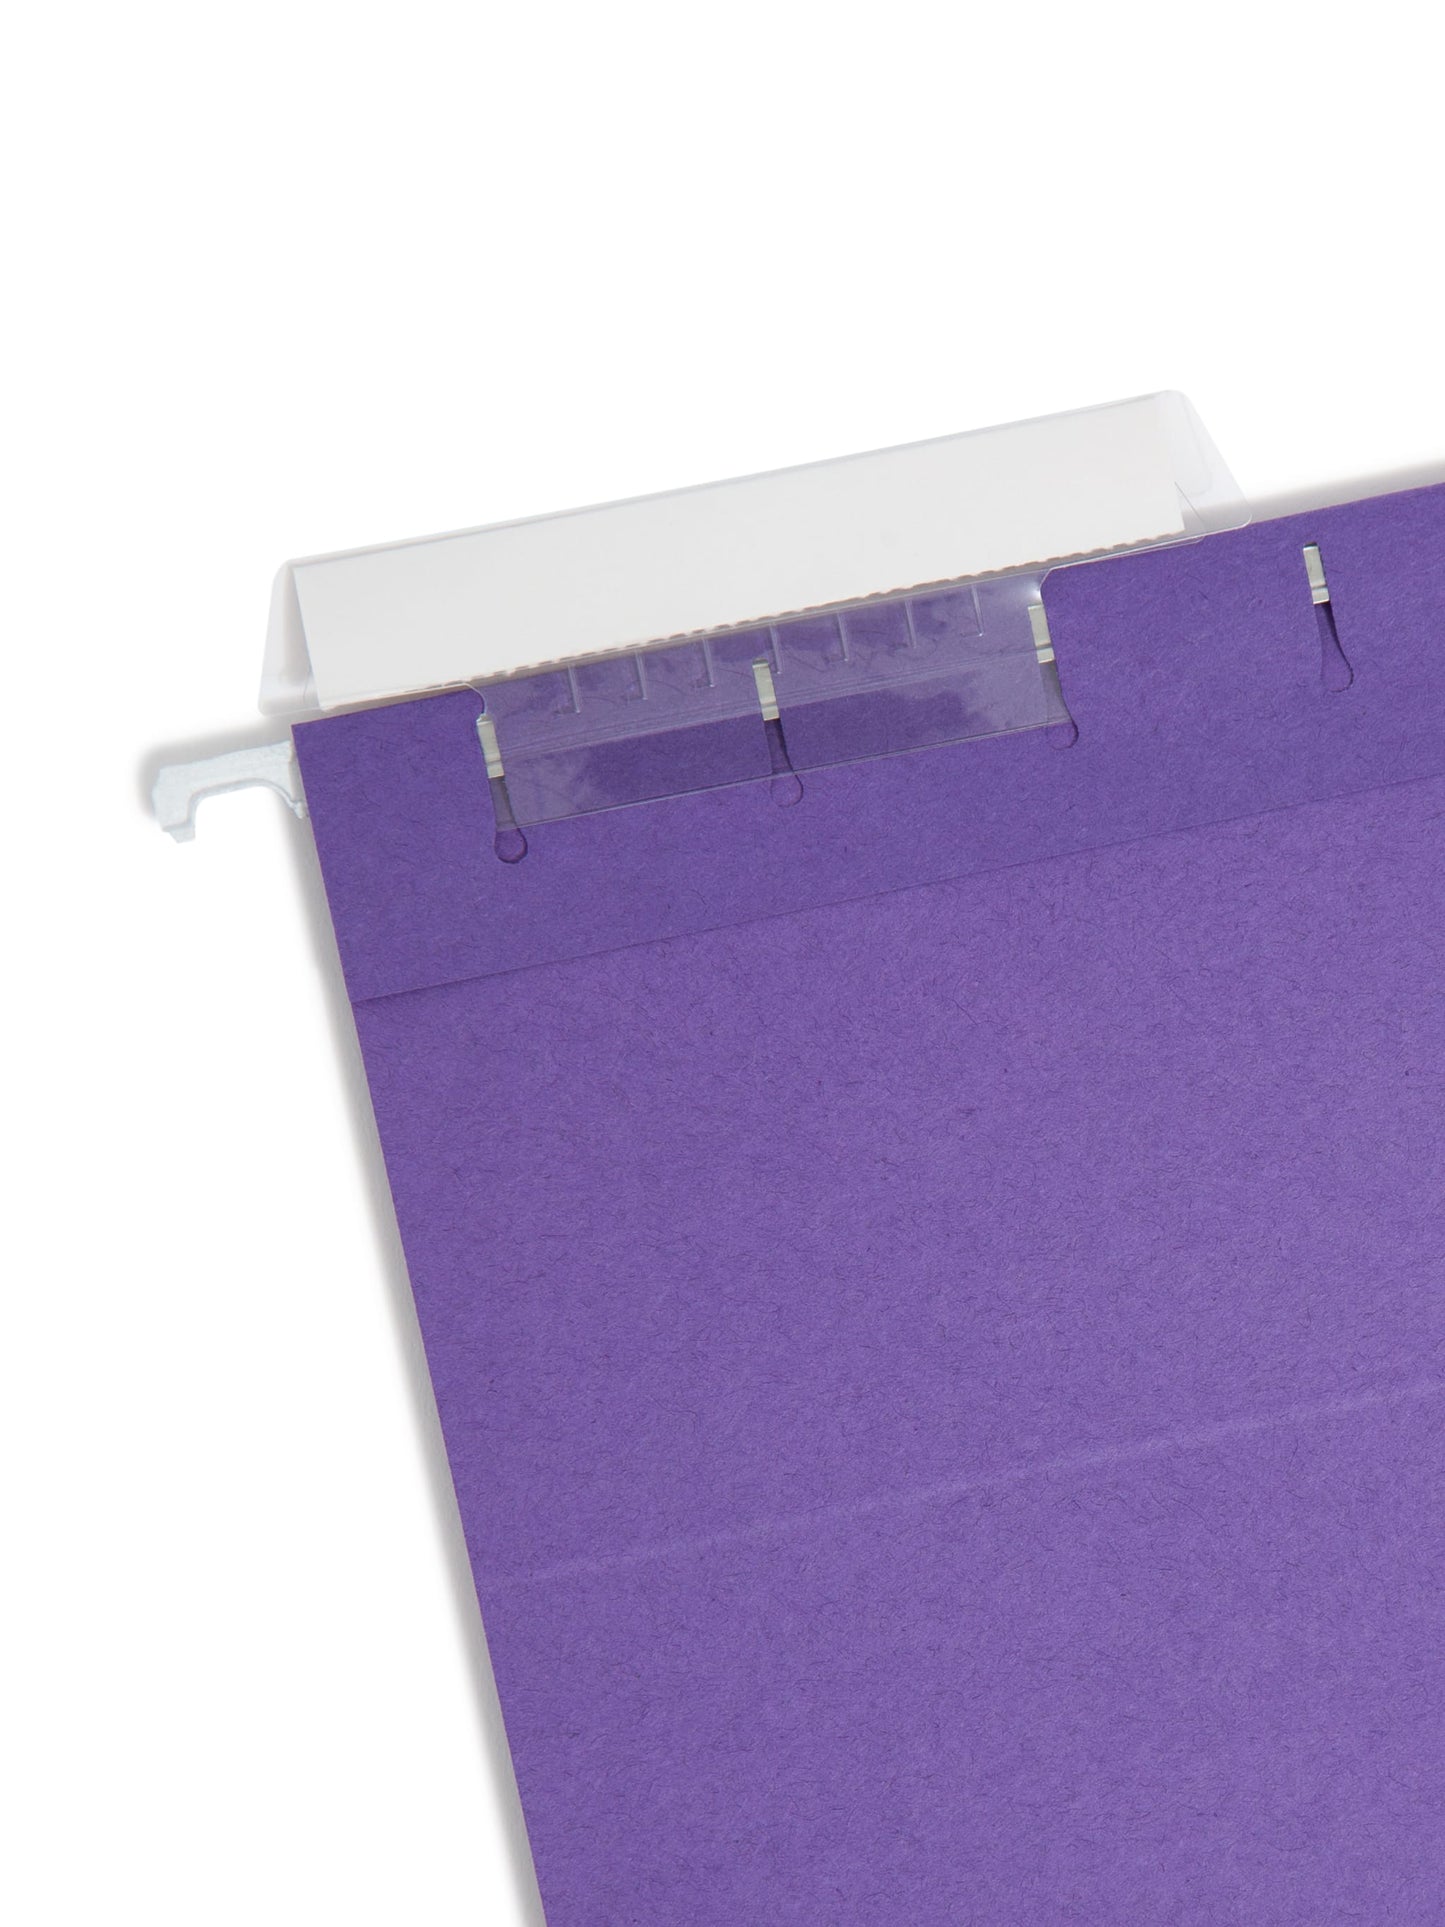 Standard Hanging File Folders with 1/3-Cut Tabs, Purple Color, Letter Size, Set of 25, 086486640237